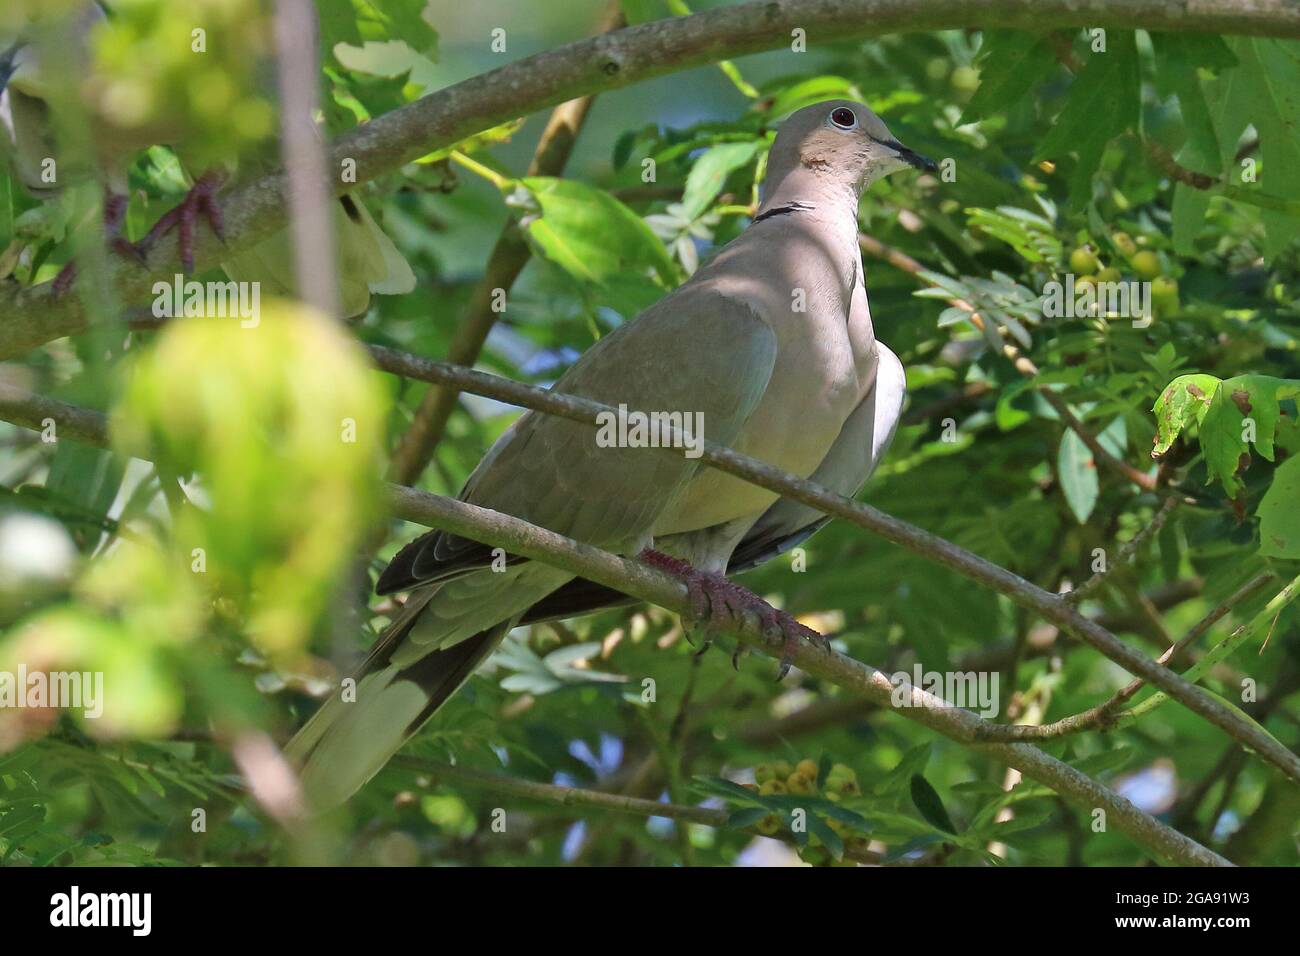 Eurasian collared dove (streptopelia decaocto) in the shade of a tree Stock Photo